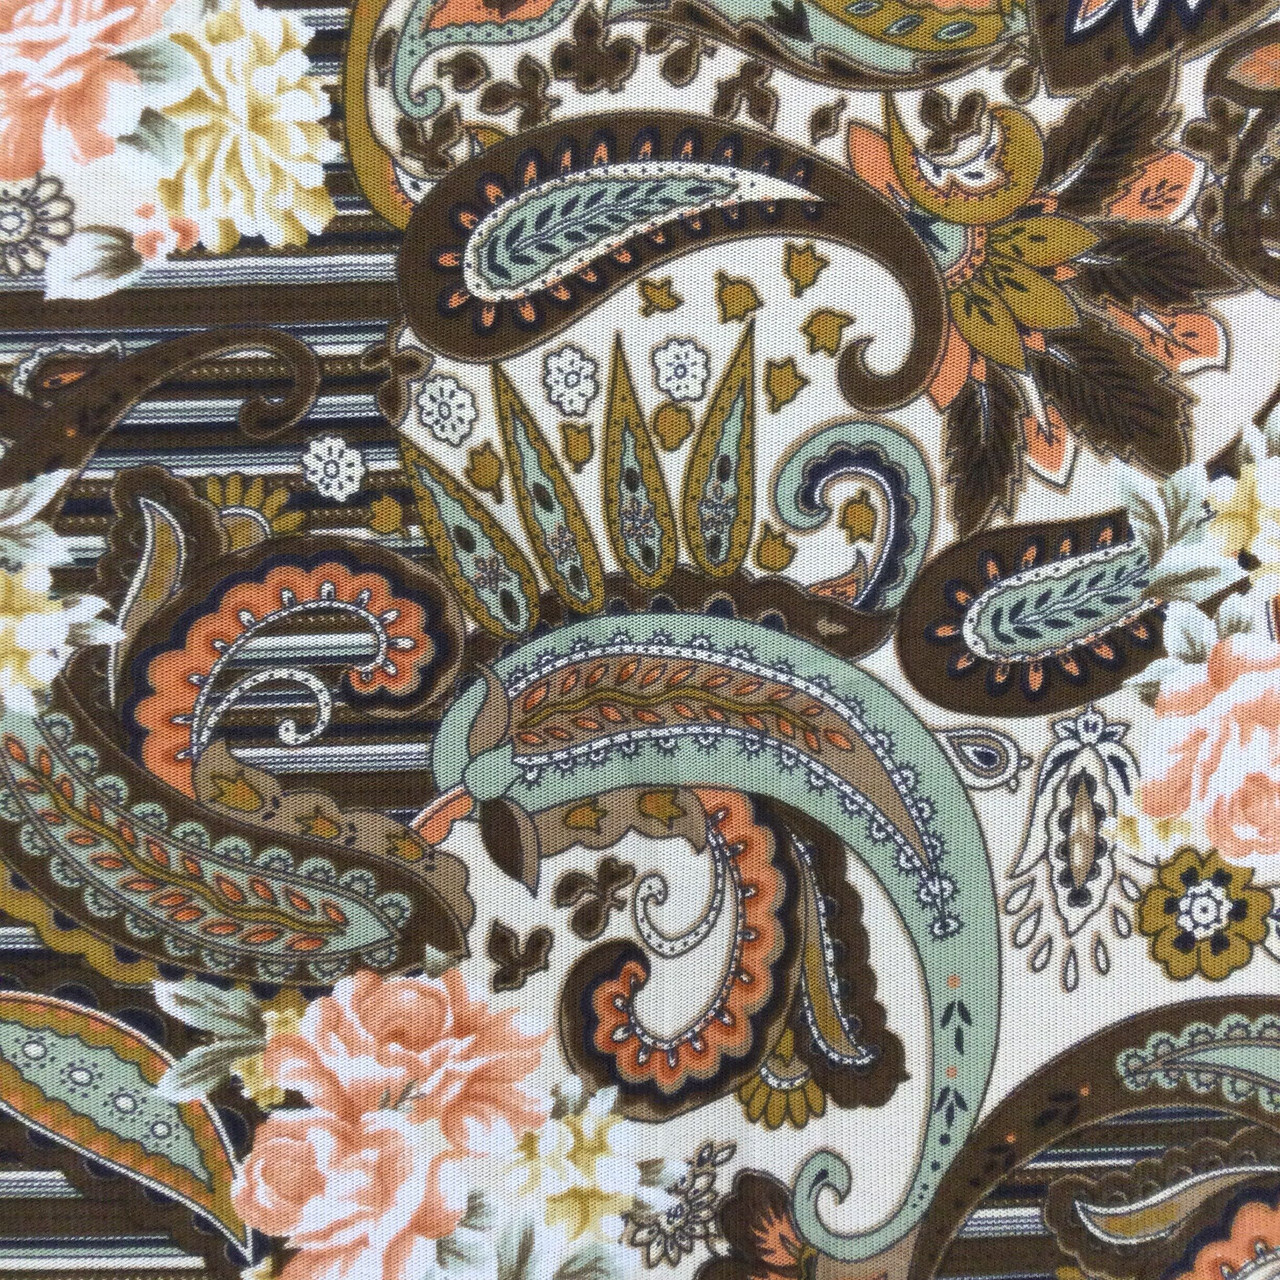 Retro Floral and Paisley in Orange and Brown   Sheer Knit Mesh Stretch  Fabric   Clothing and Apparel   By The Yard    inch Wide